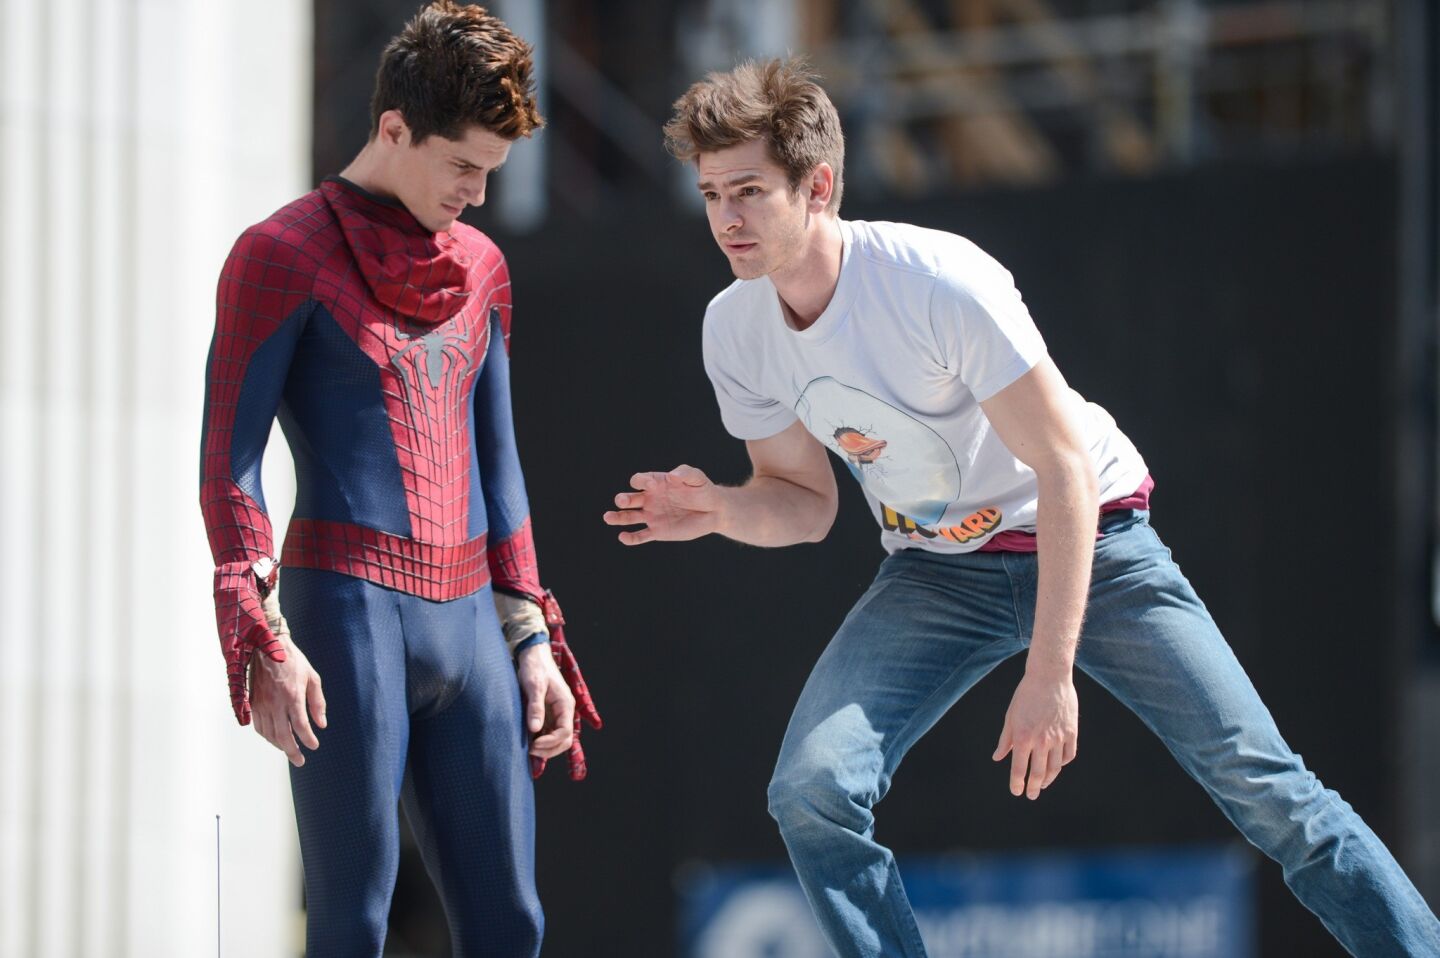 Actor Andrew Garfield, right, rehearses a scene with his stunt double William Spencer on the "The Amazing Spiderman 2" movie set in Madison Square Park in New York.